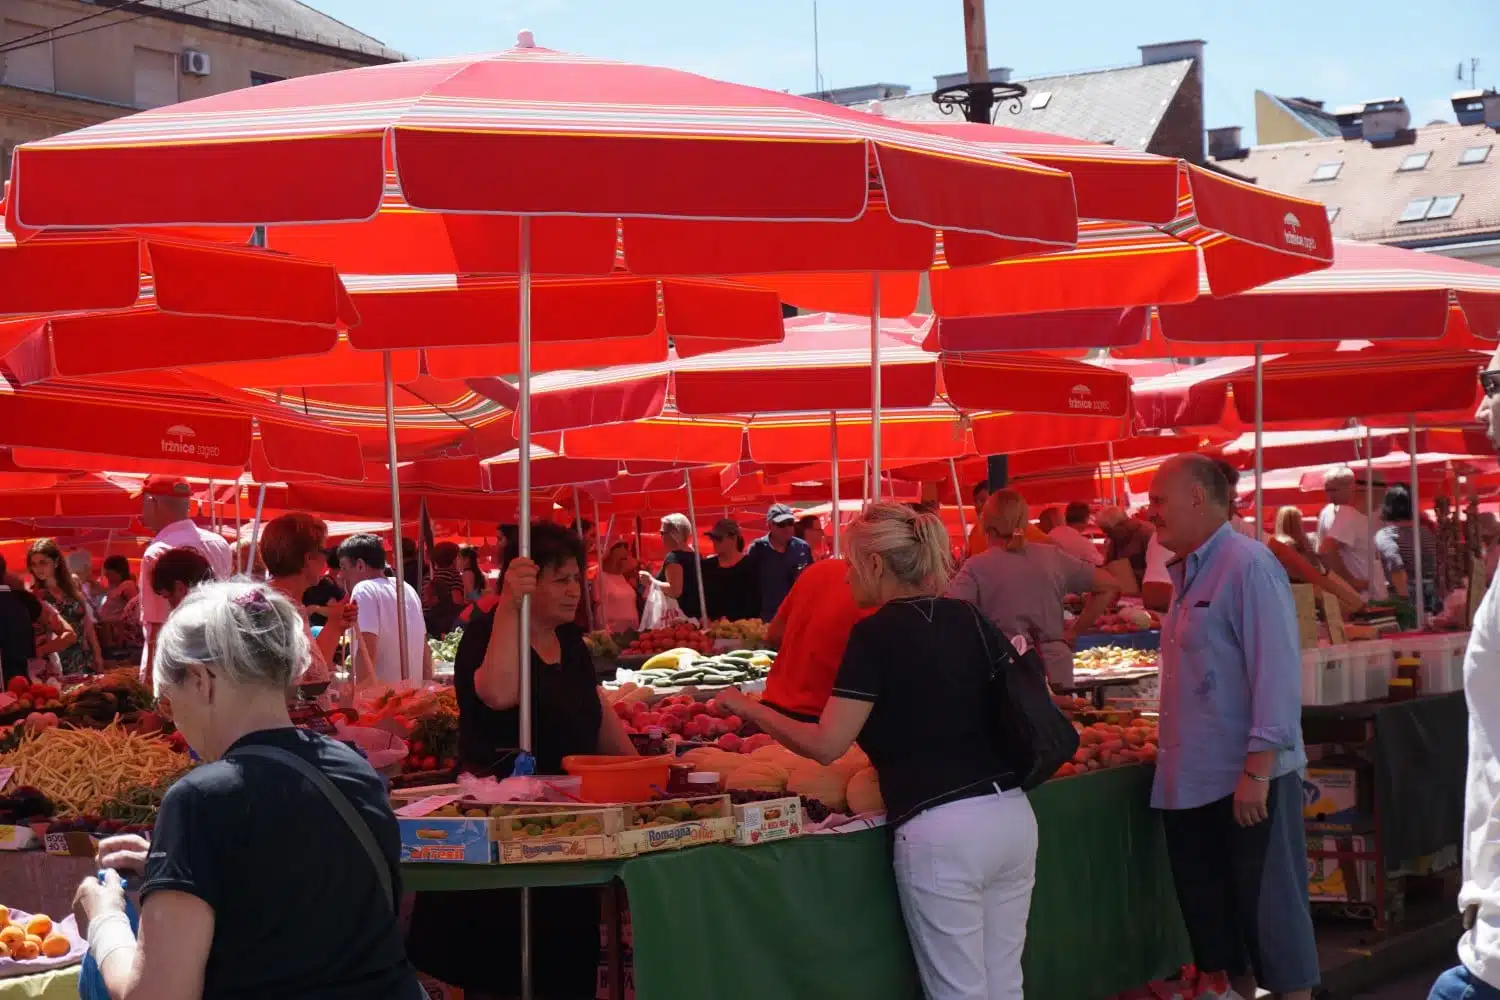 Dolac Market is one of the top things to do in Zagreb. Read our full guide.